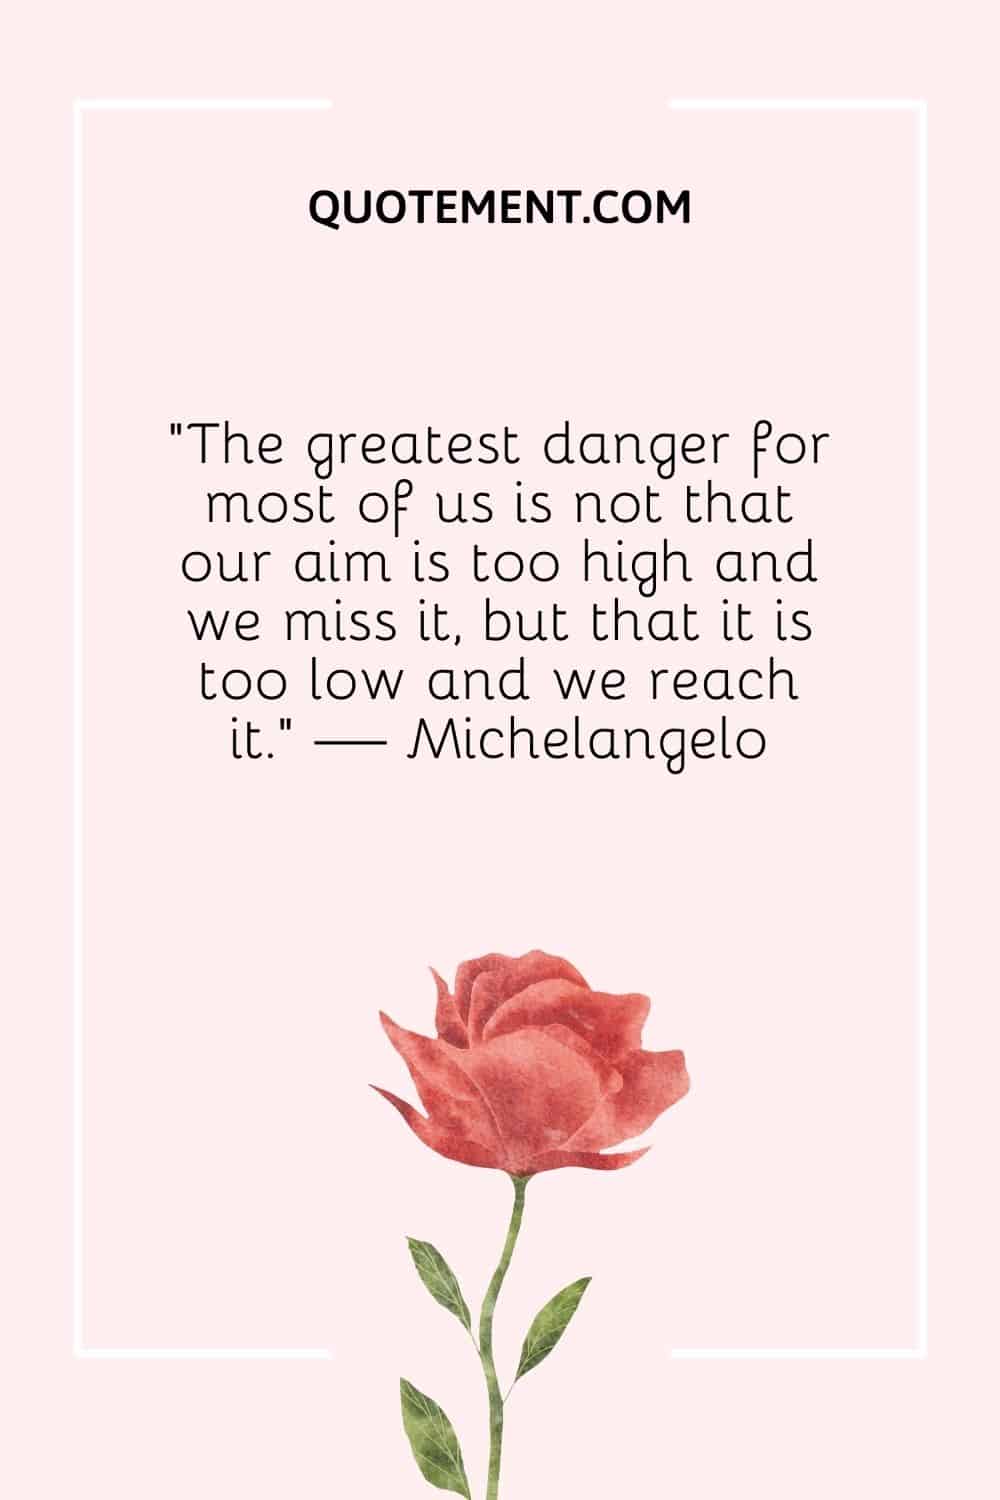 “The greatest danger for most of us is not that our aim is too high and we miss it, but that it is too low and we reach it.” — Michelangelo